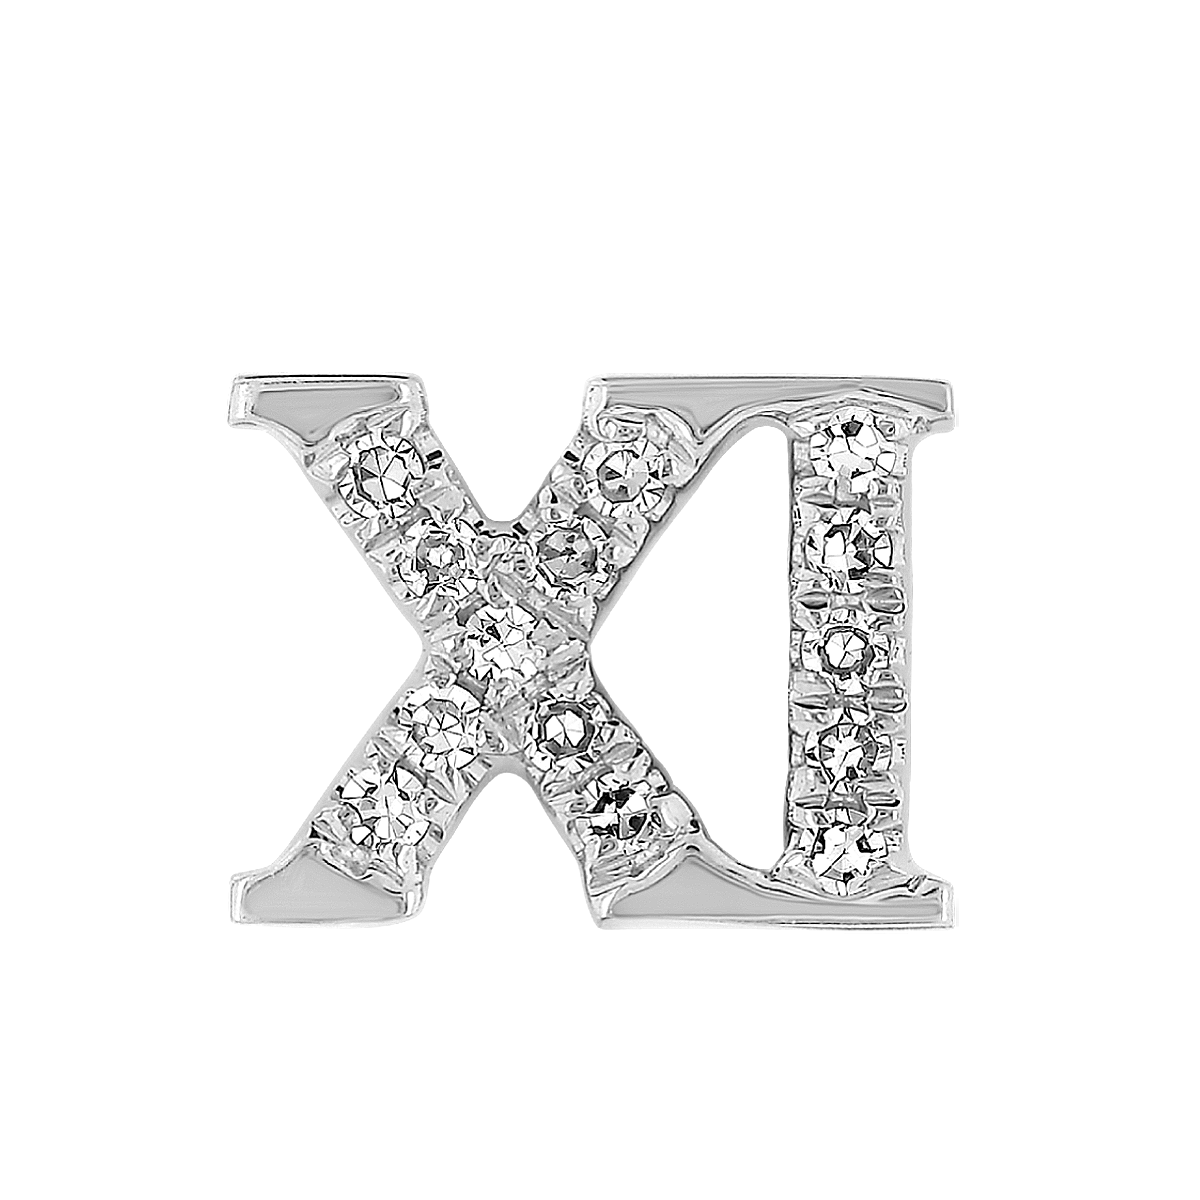 Roman Numeral XI Charm – Michael and Son's Jewelers